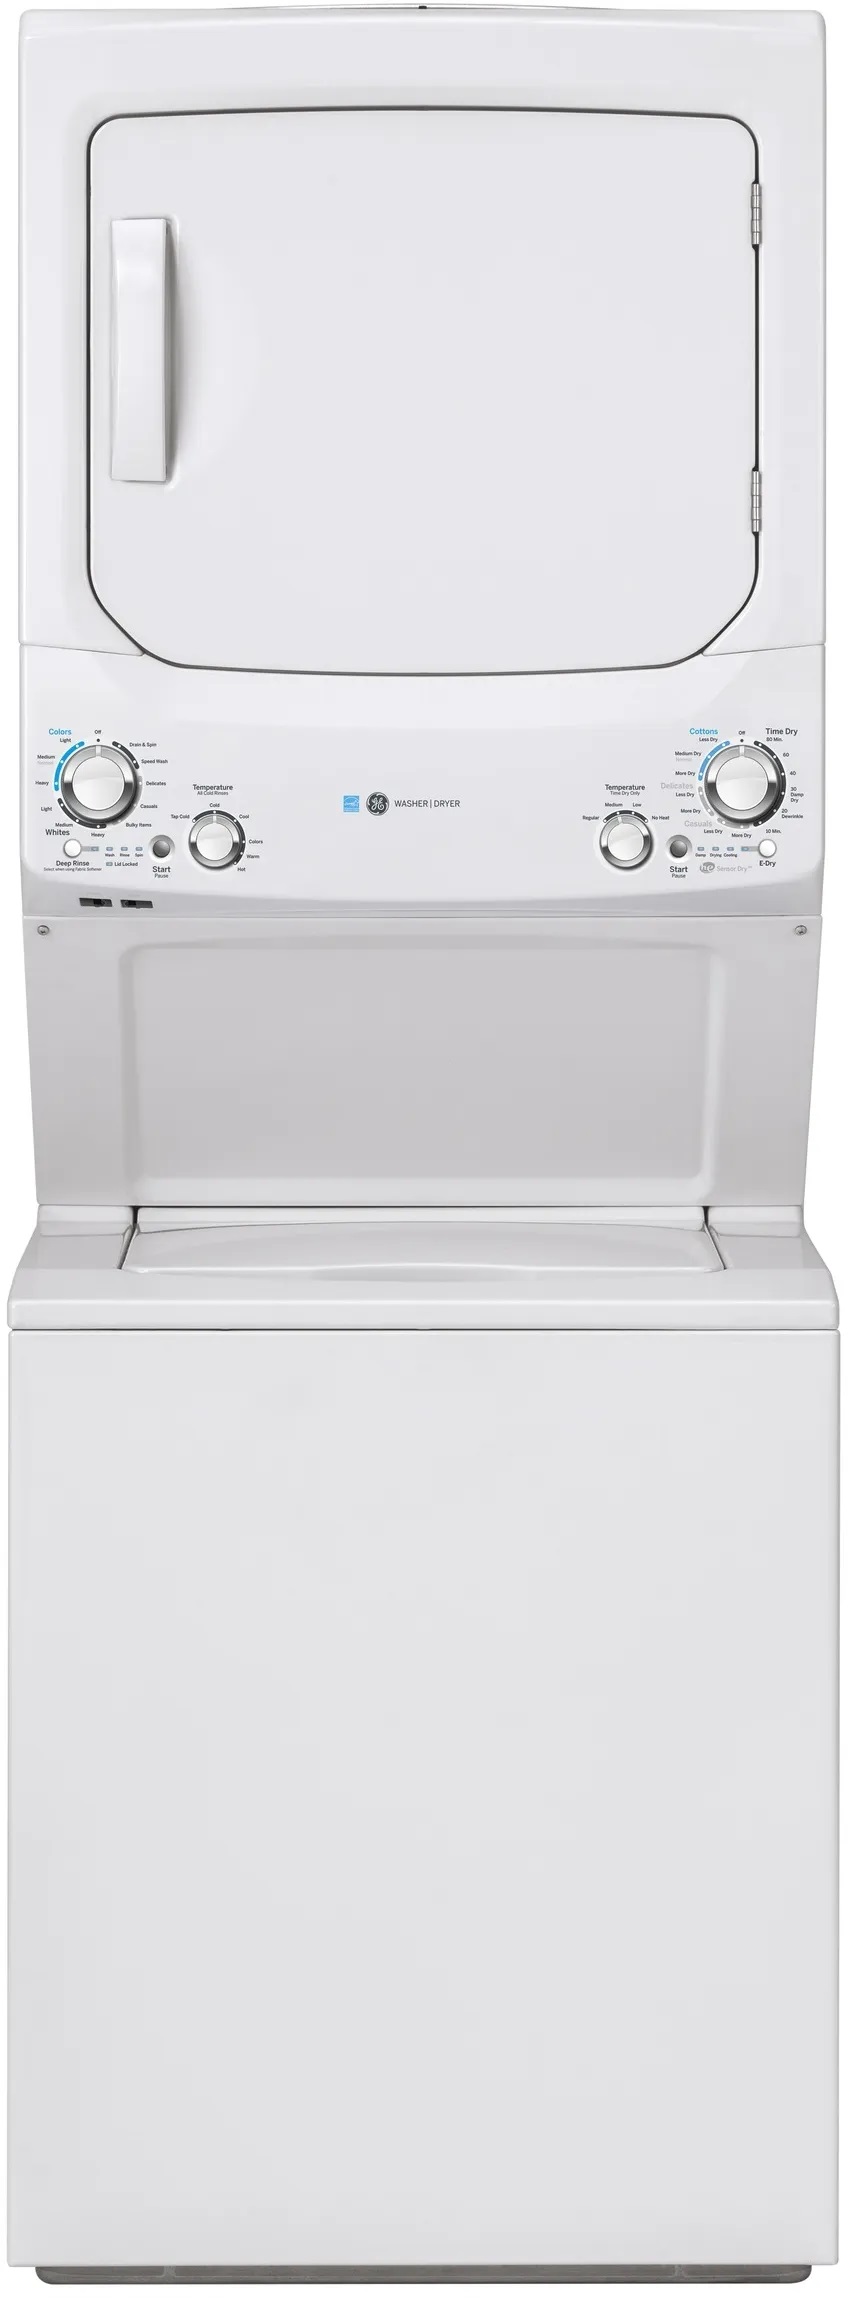 energy-efficient-washers-and-dryers-for-eco-friendly-buyers-spencer-s